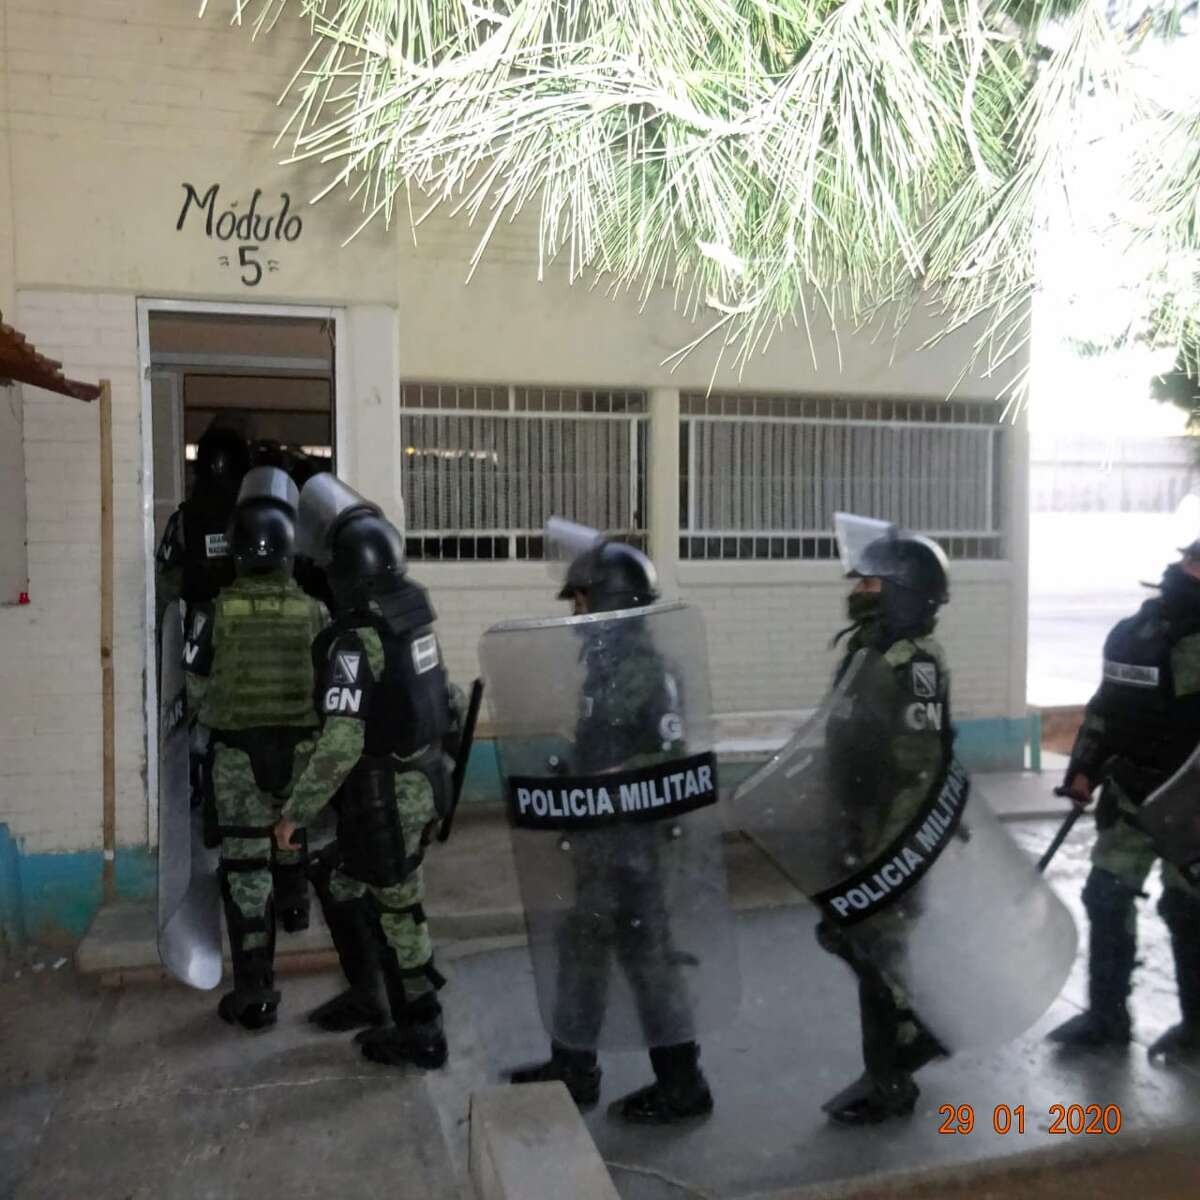 Mexican National Guard soldiers in tactical gear are seen inspecting an area of the prison in Nuevo Laredo.